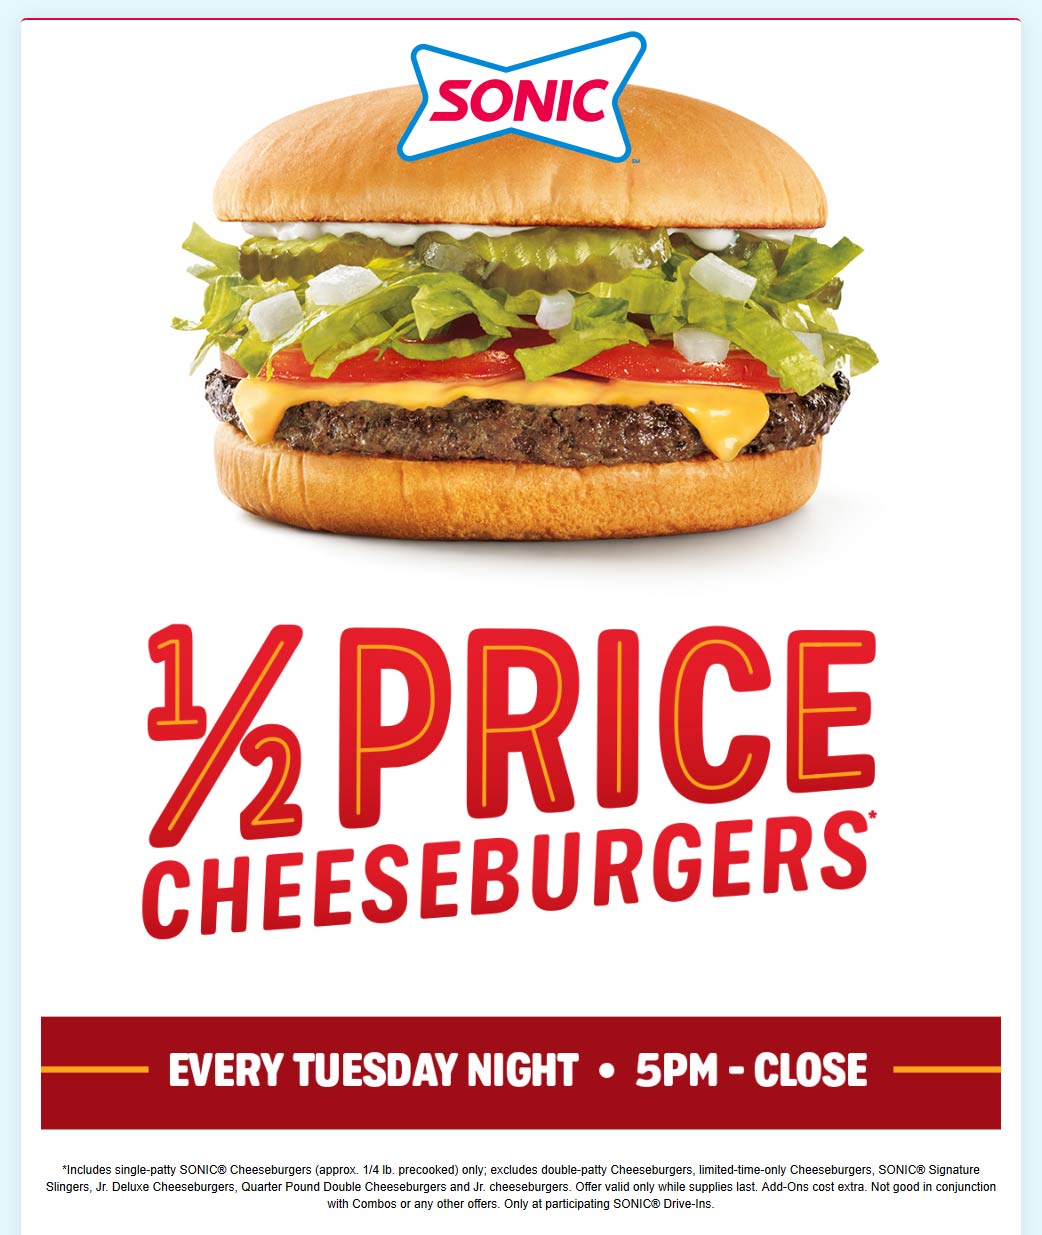 Sonic Drive-In stores Coupon  50% off cheeseburgers tonight at Sonic Drive-In #sonicdrivein